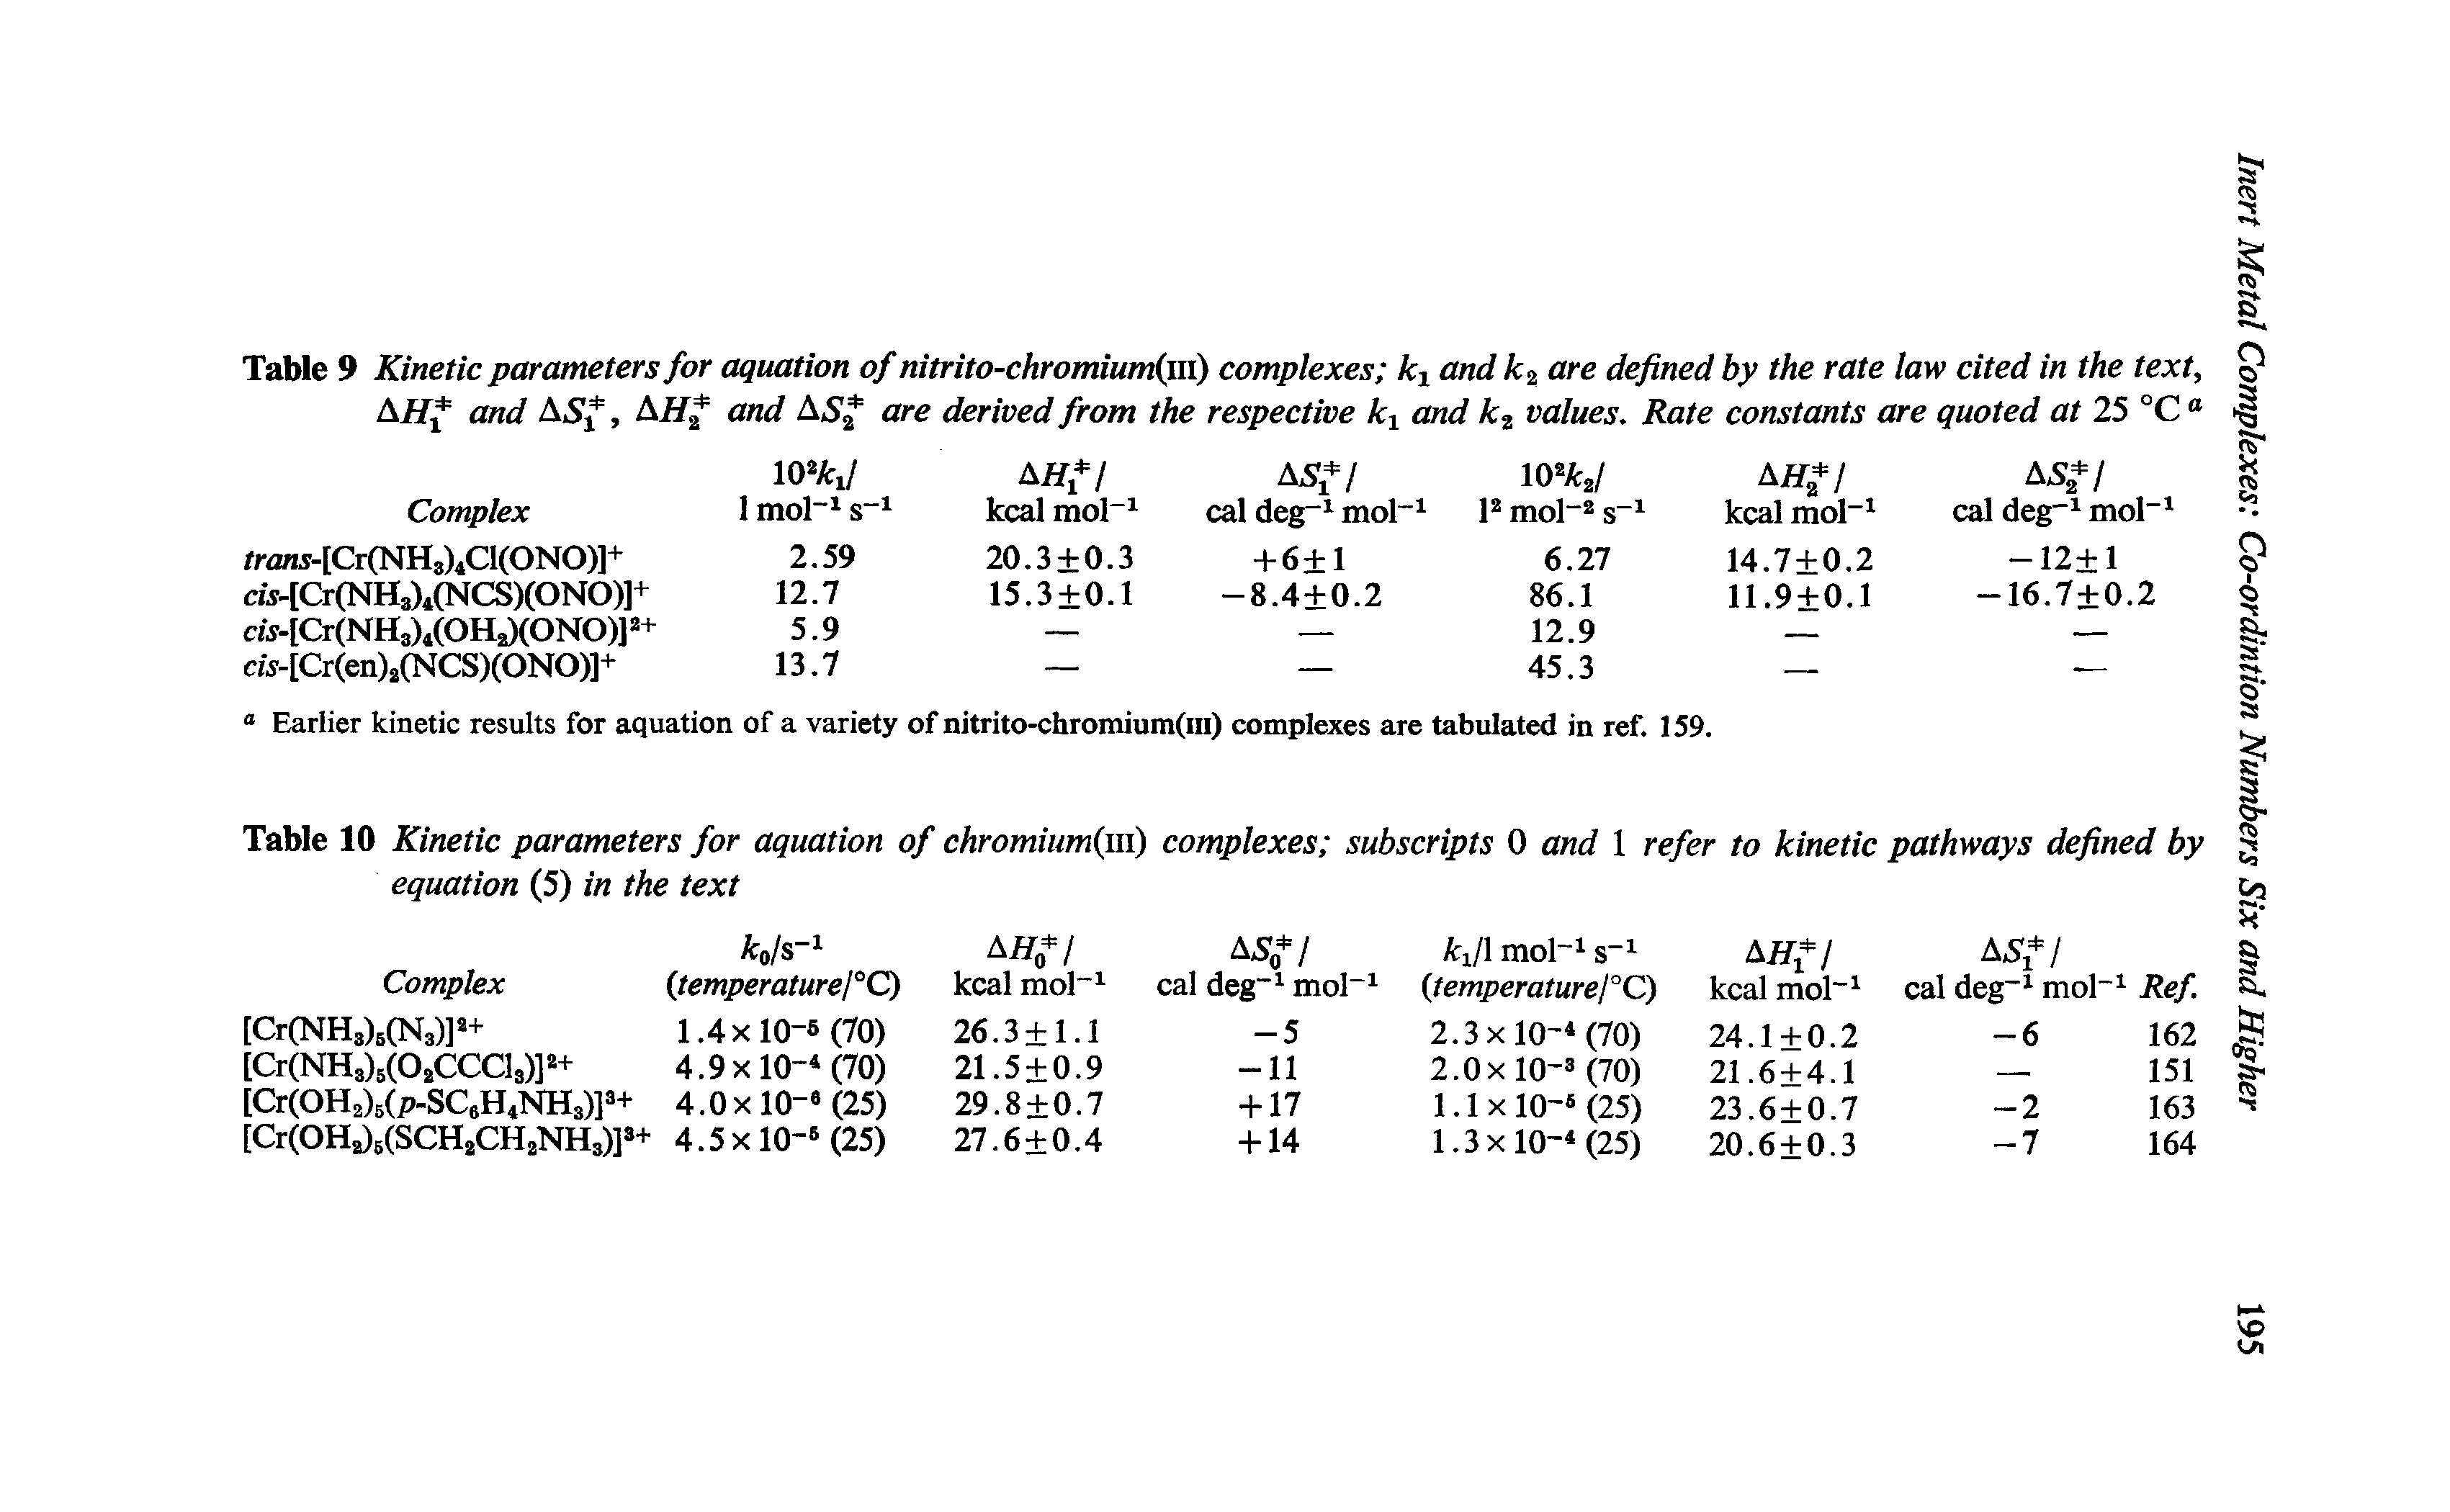 Table 9 Kinetic parameters for aquation of nitrito-chromium m) complexes kx and k% are defined by the rate law cited in the text, MI and AS are derived from the respective kx and kz values. Rate constants are quoted at 25 °C ...